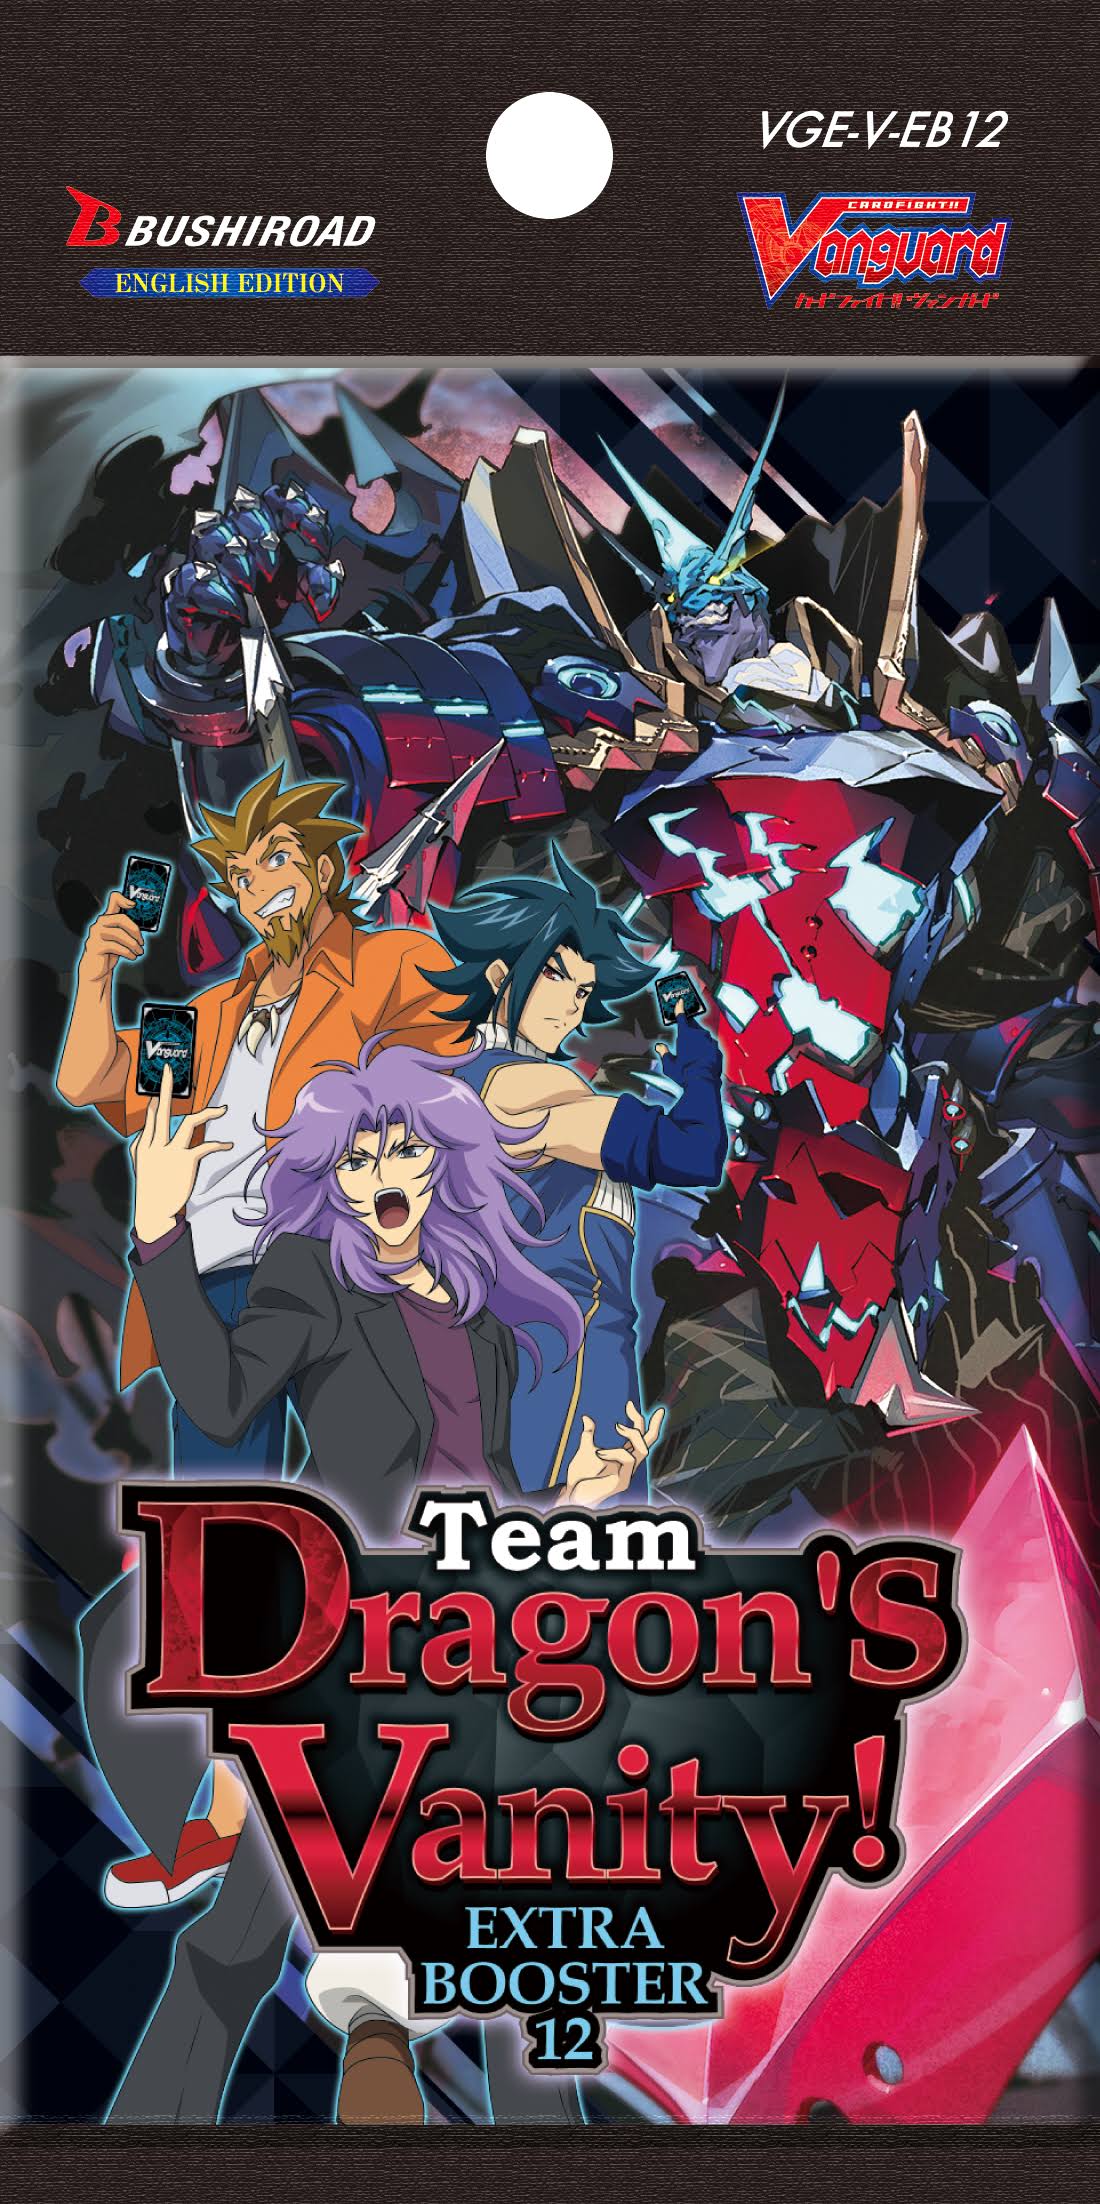 Cardfight!! Vanguard: Team Dragon's Vanity! Extra Booster Pack